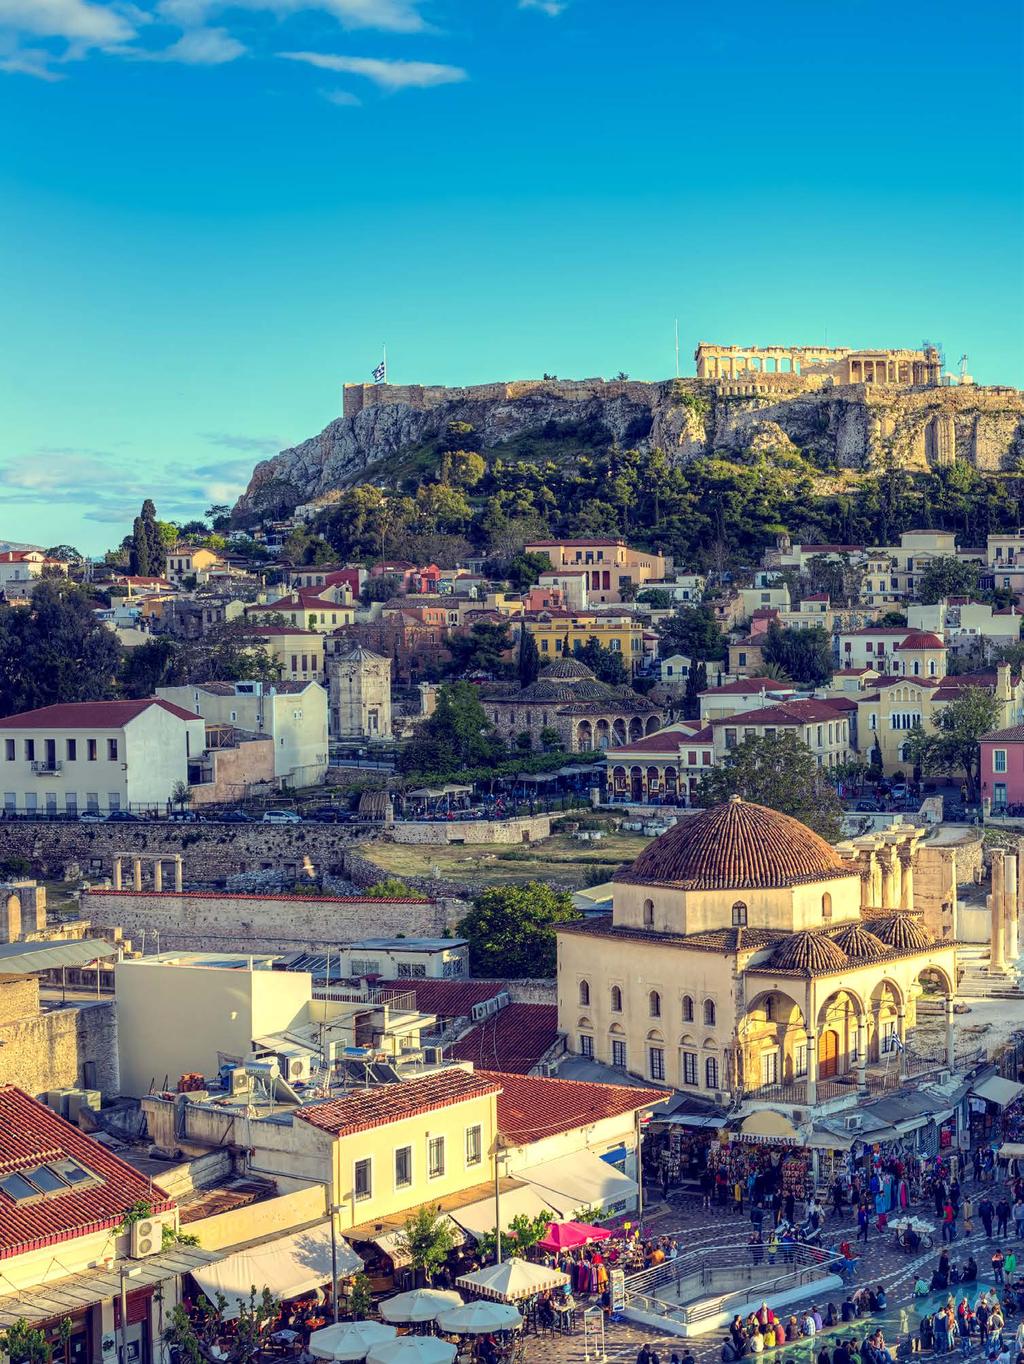 Dr. Sue Adventure & Meditation Itinerary: Greece, September 4-14, 2019 was considered a national shrine for the Greeks and housed many treasures and works of art ranging from temples, monuments,